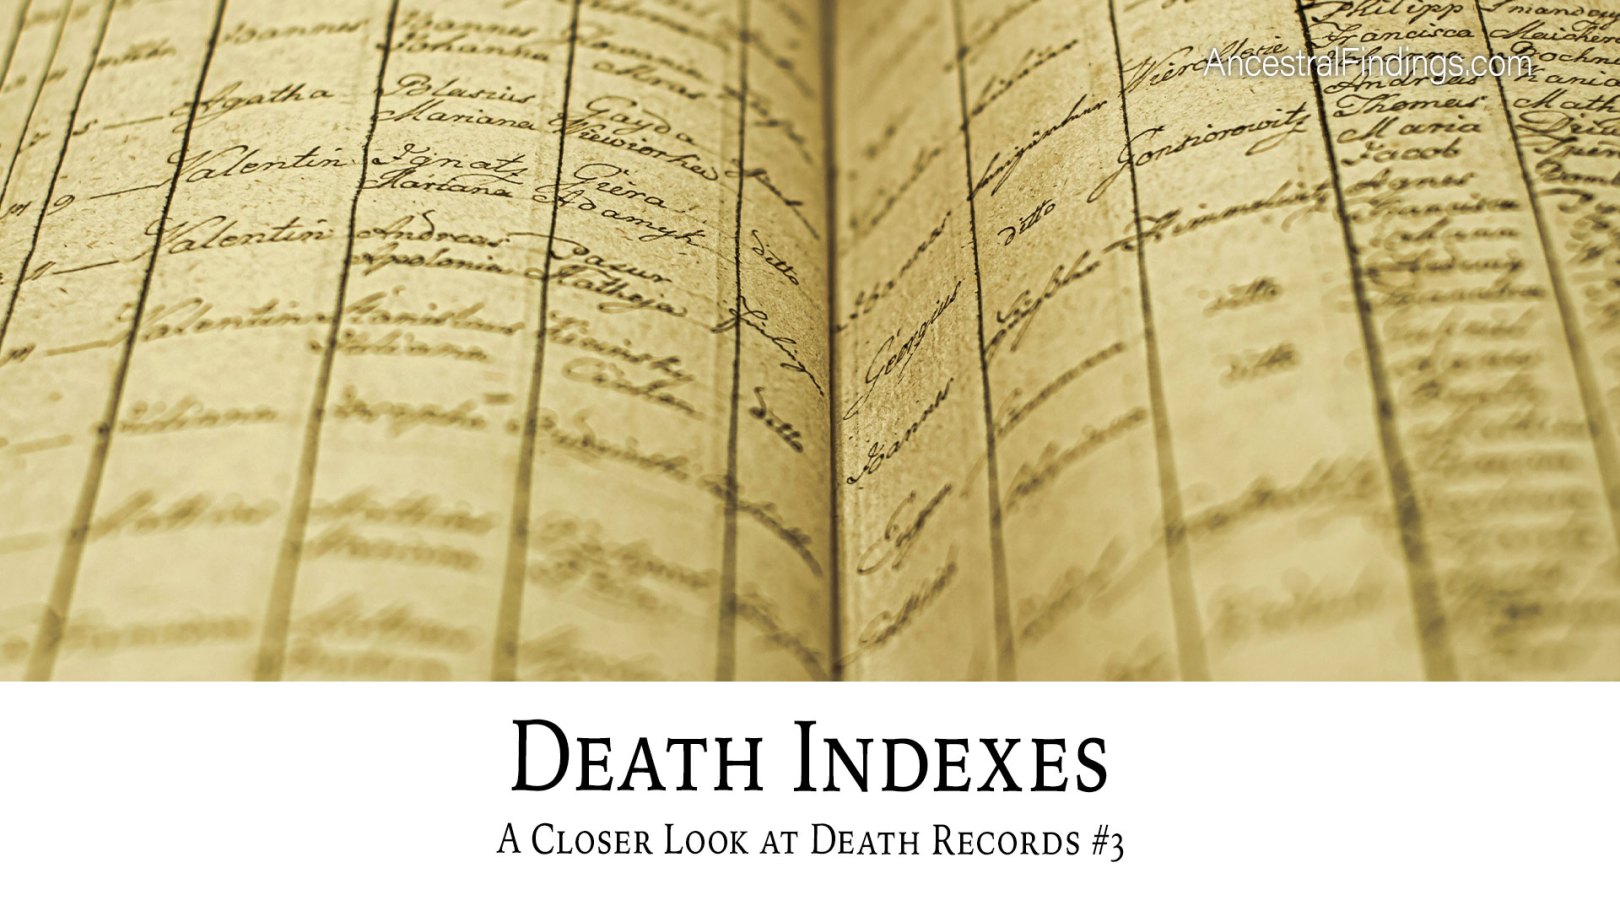 Death Indexes: A Closer Look at Death Records #3